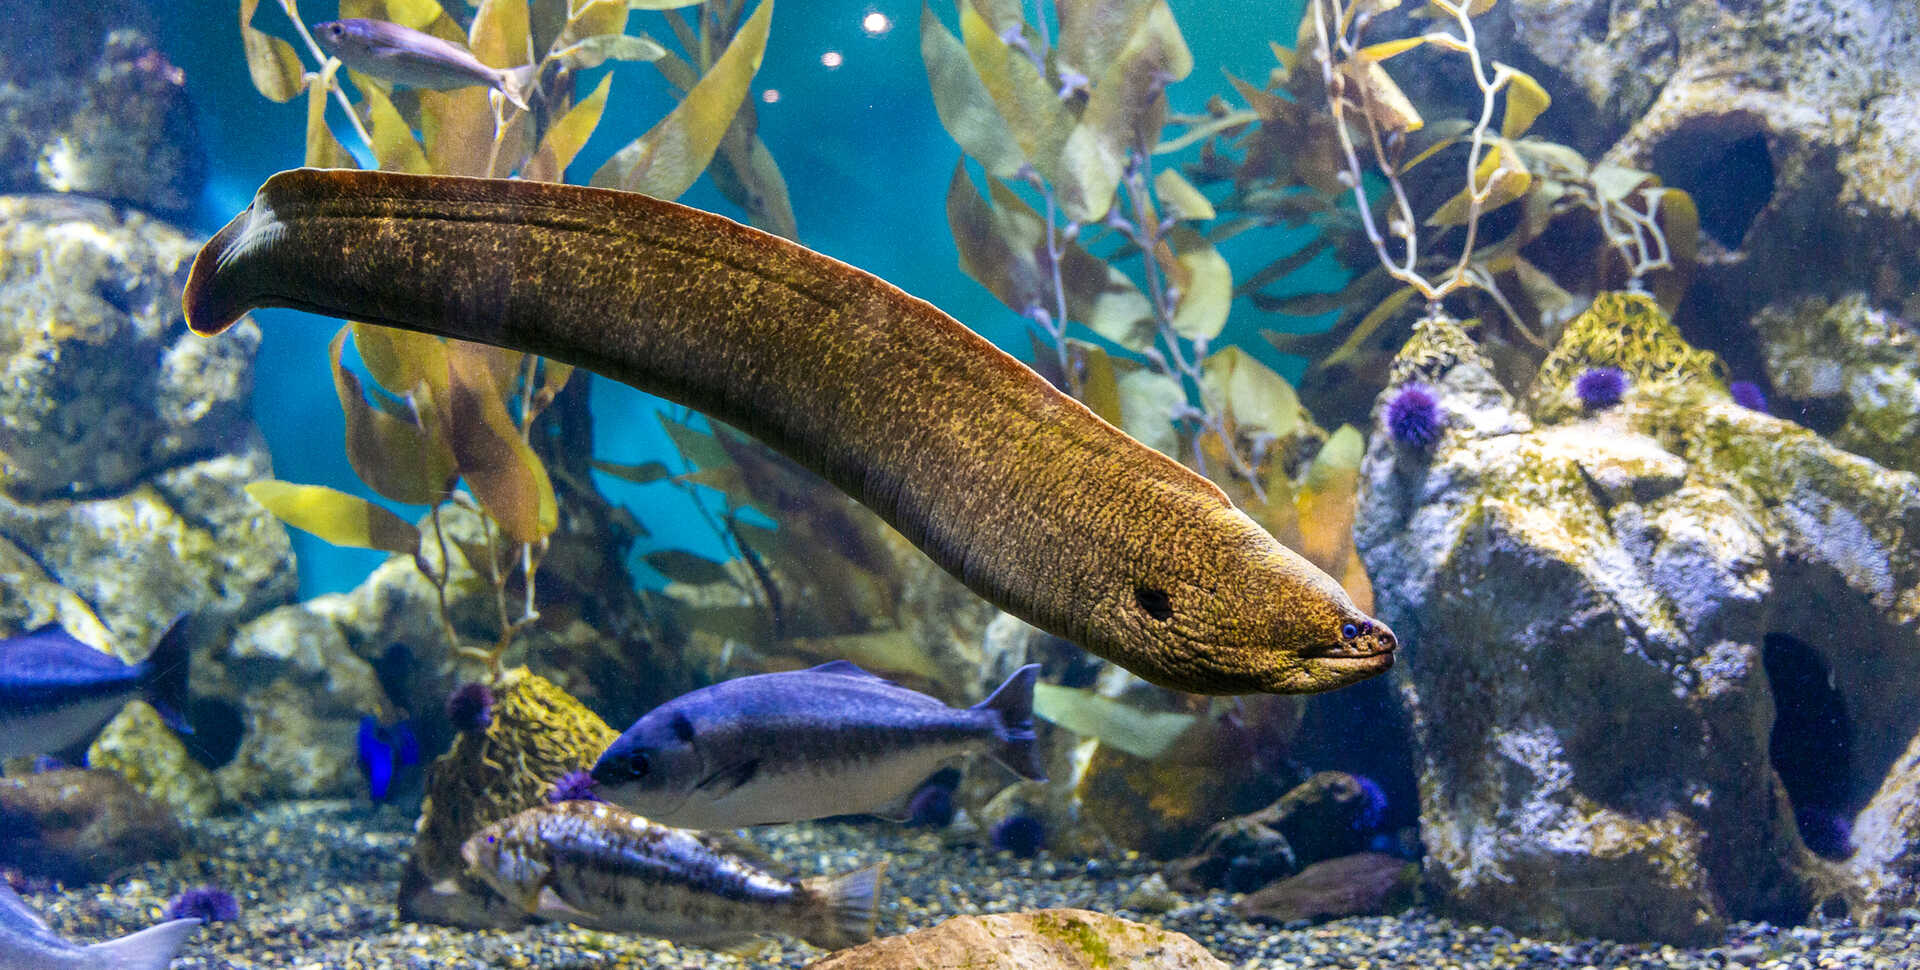 moray eel swims freely in its habitat at California Academy of Sciences